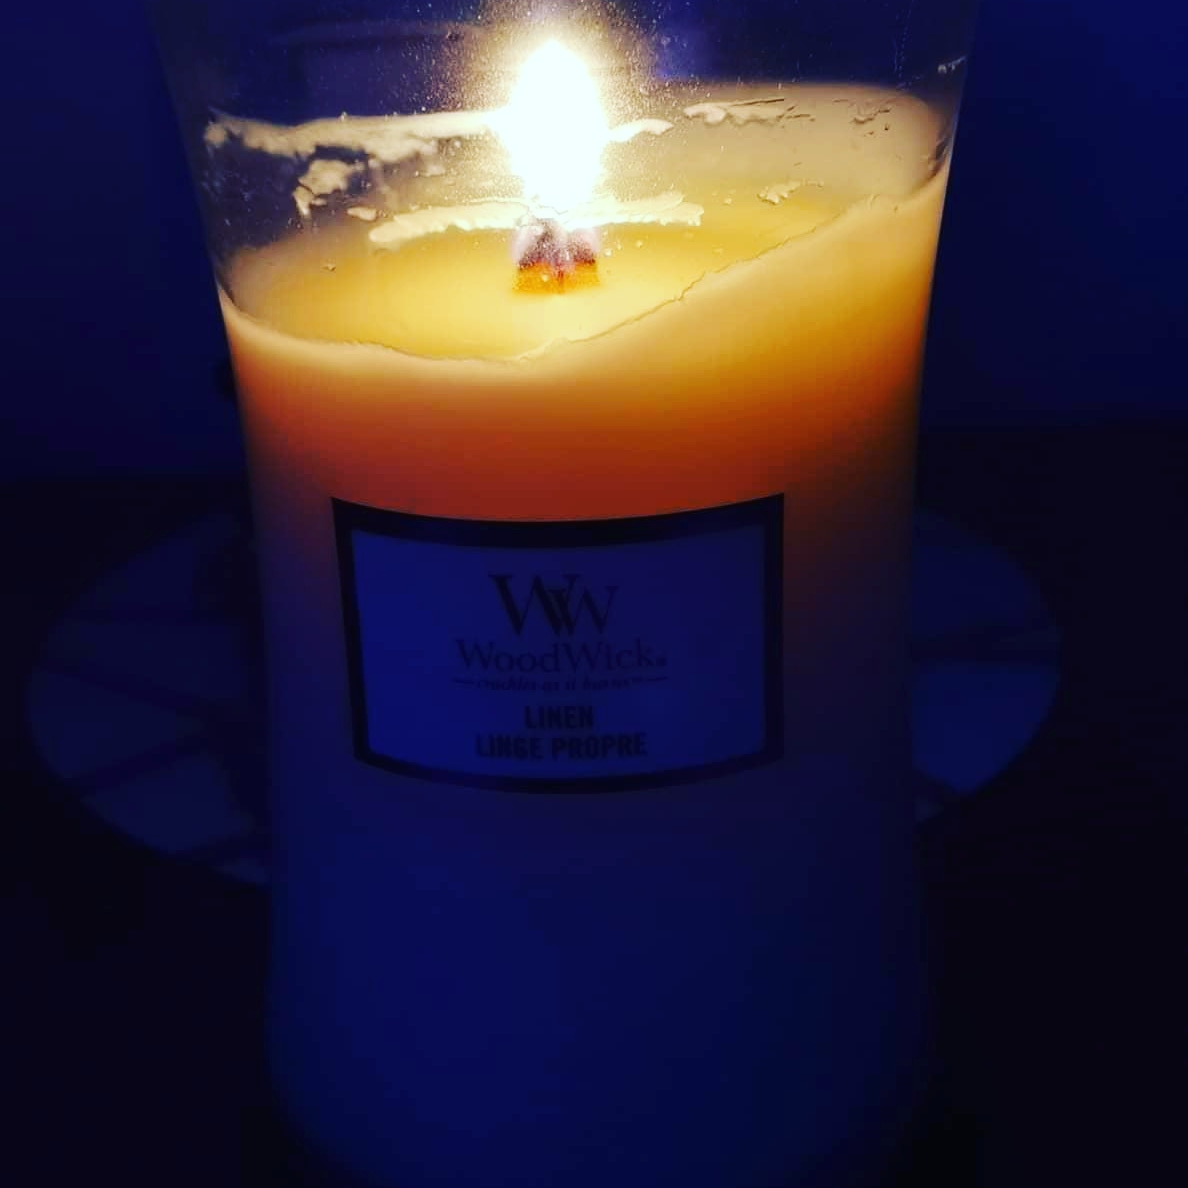 We remember the babies born sleeping,
Those we carried but never held,
Those we held but could not take home, 
Those who came home but could not stay ❤️💙

#waveoflight #blaw2022 #babylossawareness #BabyLossAwarenessWeek